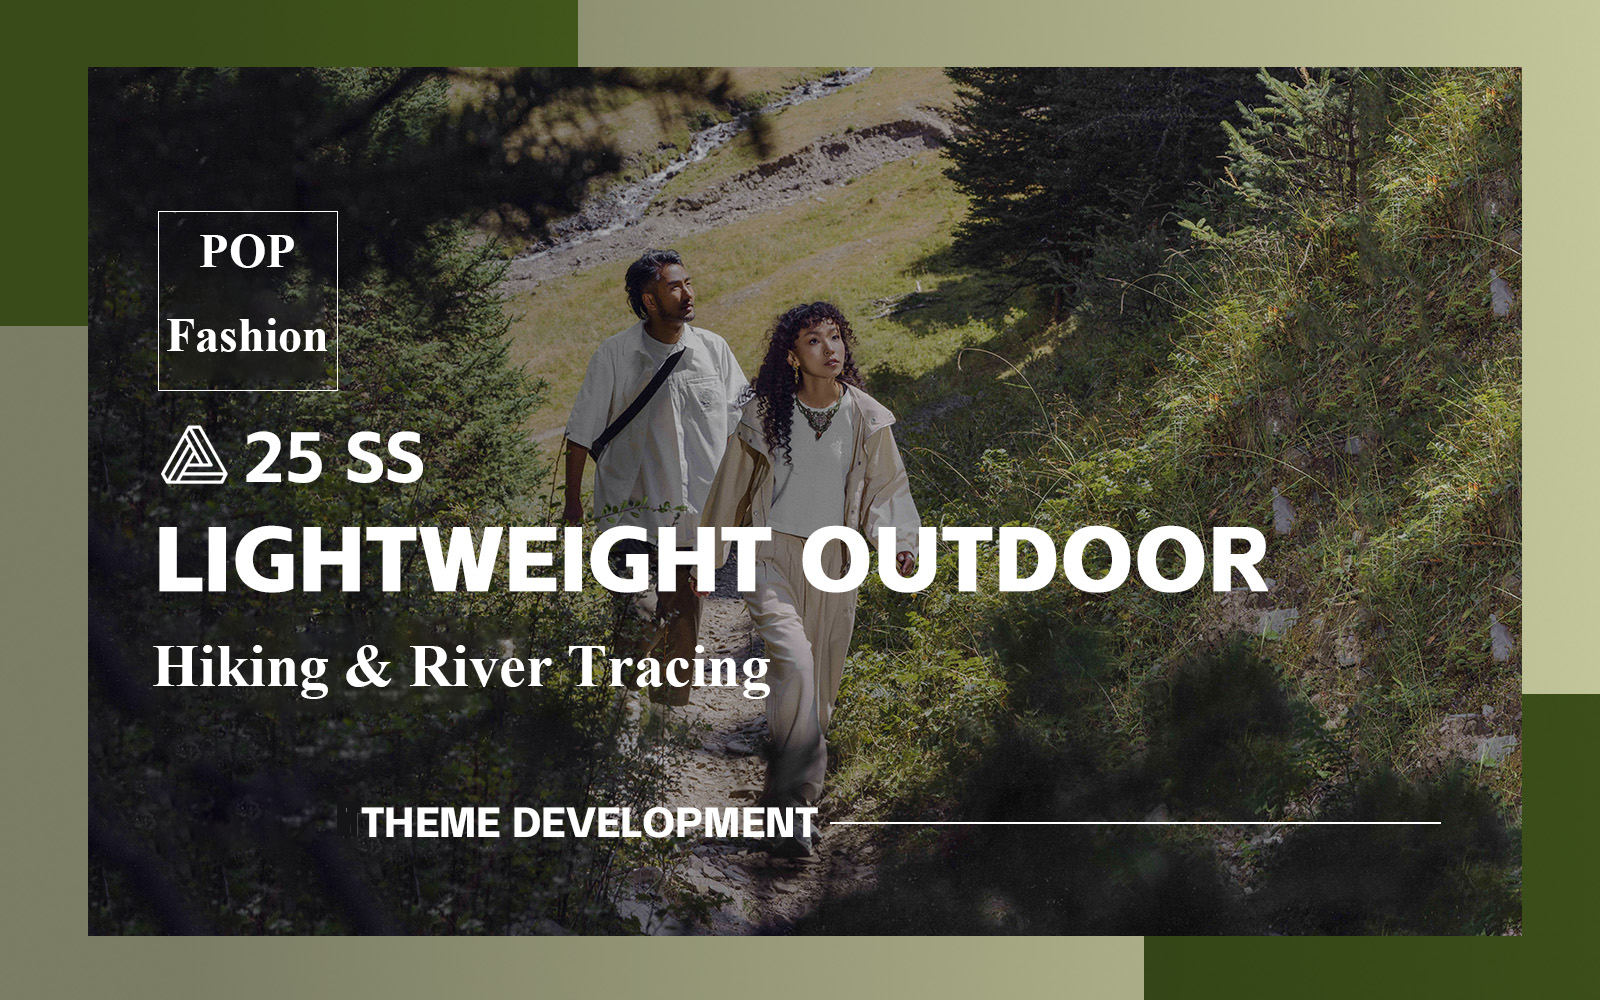 Lightweight Outdoor -- The Design Development of Hiking & River Tracing